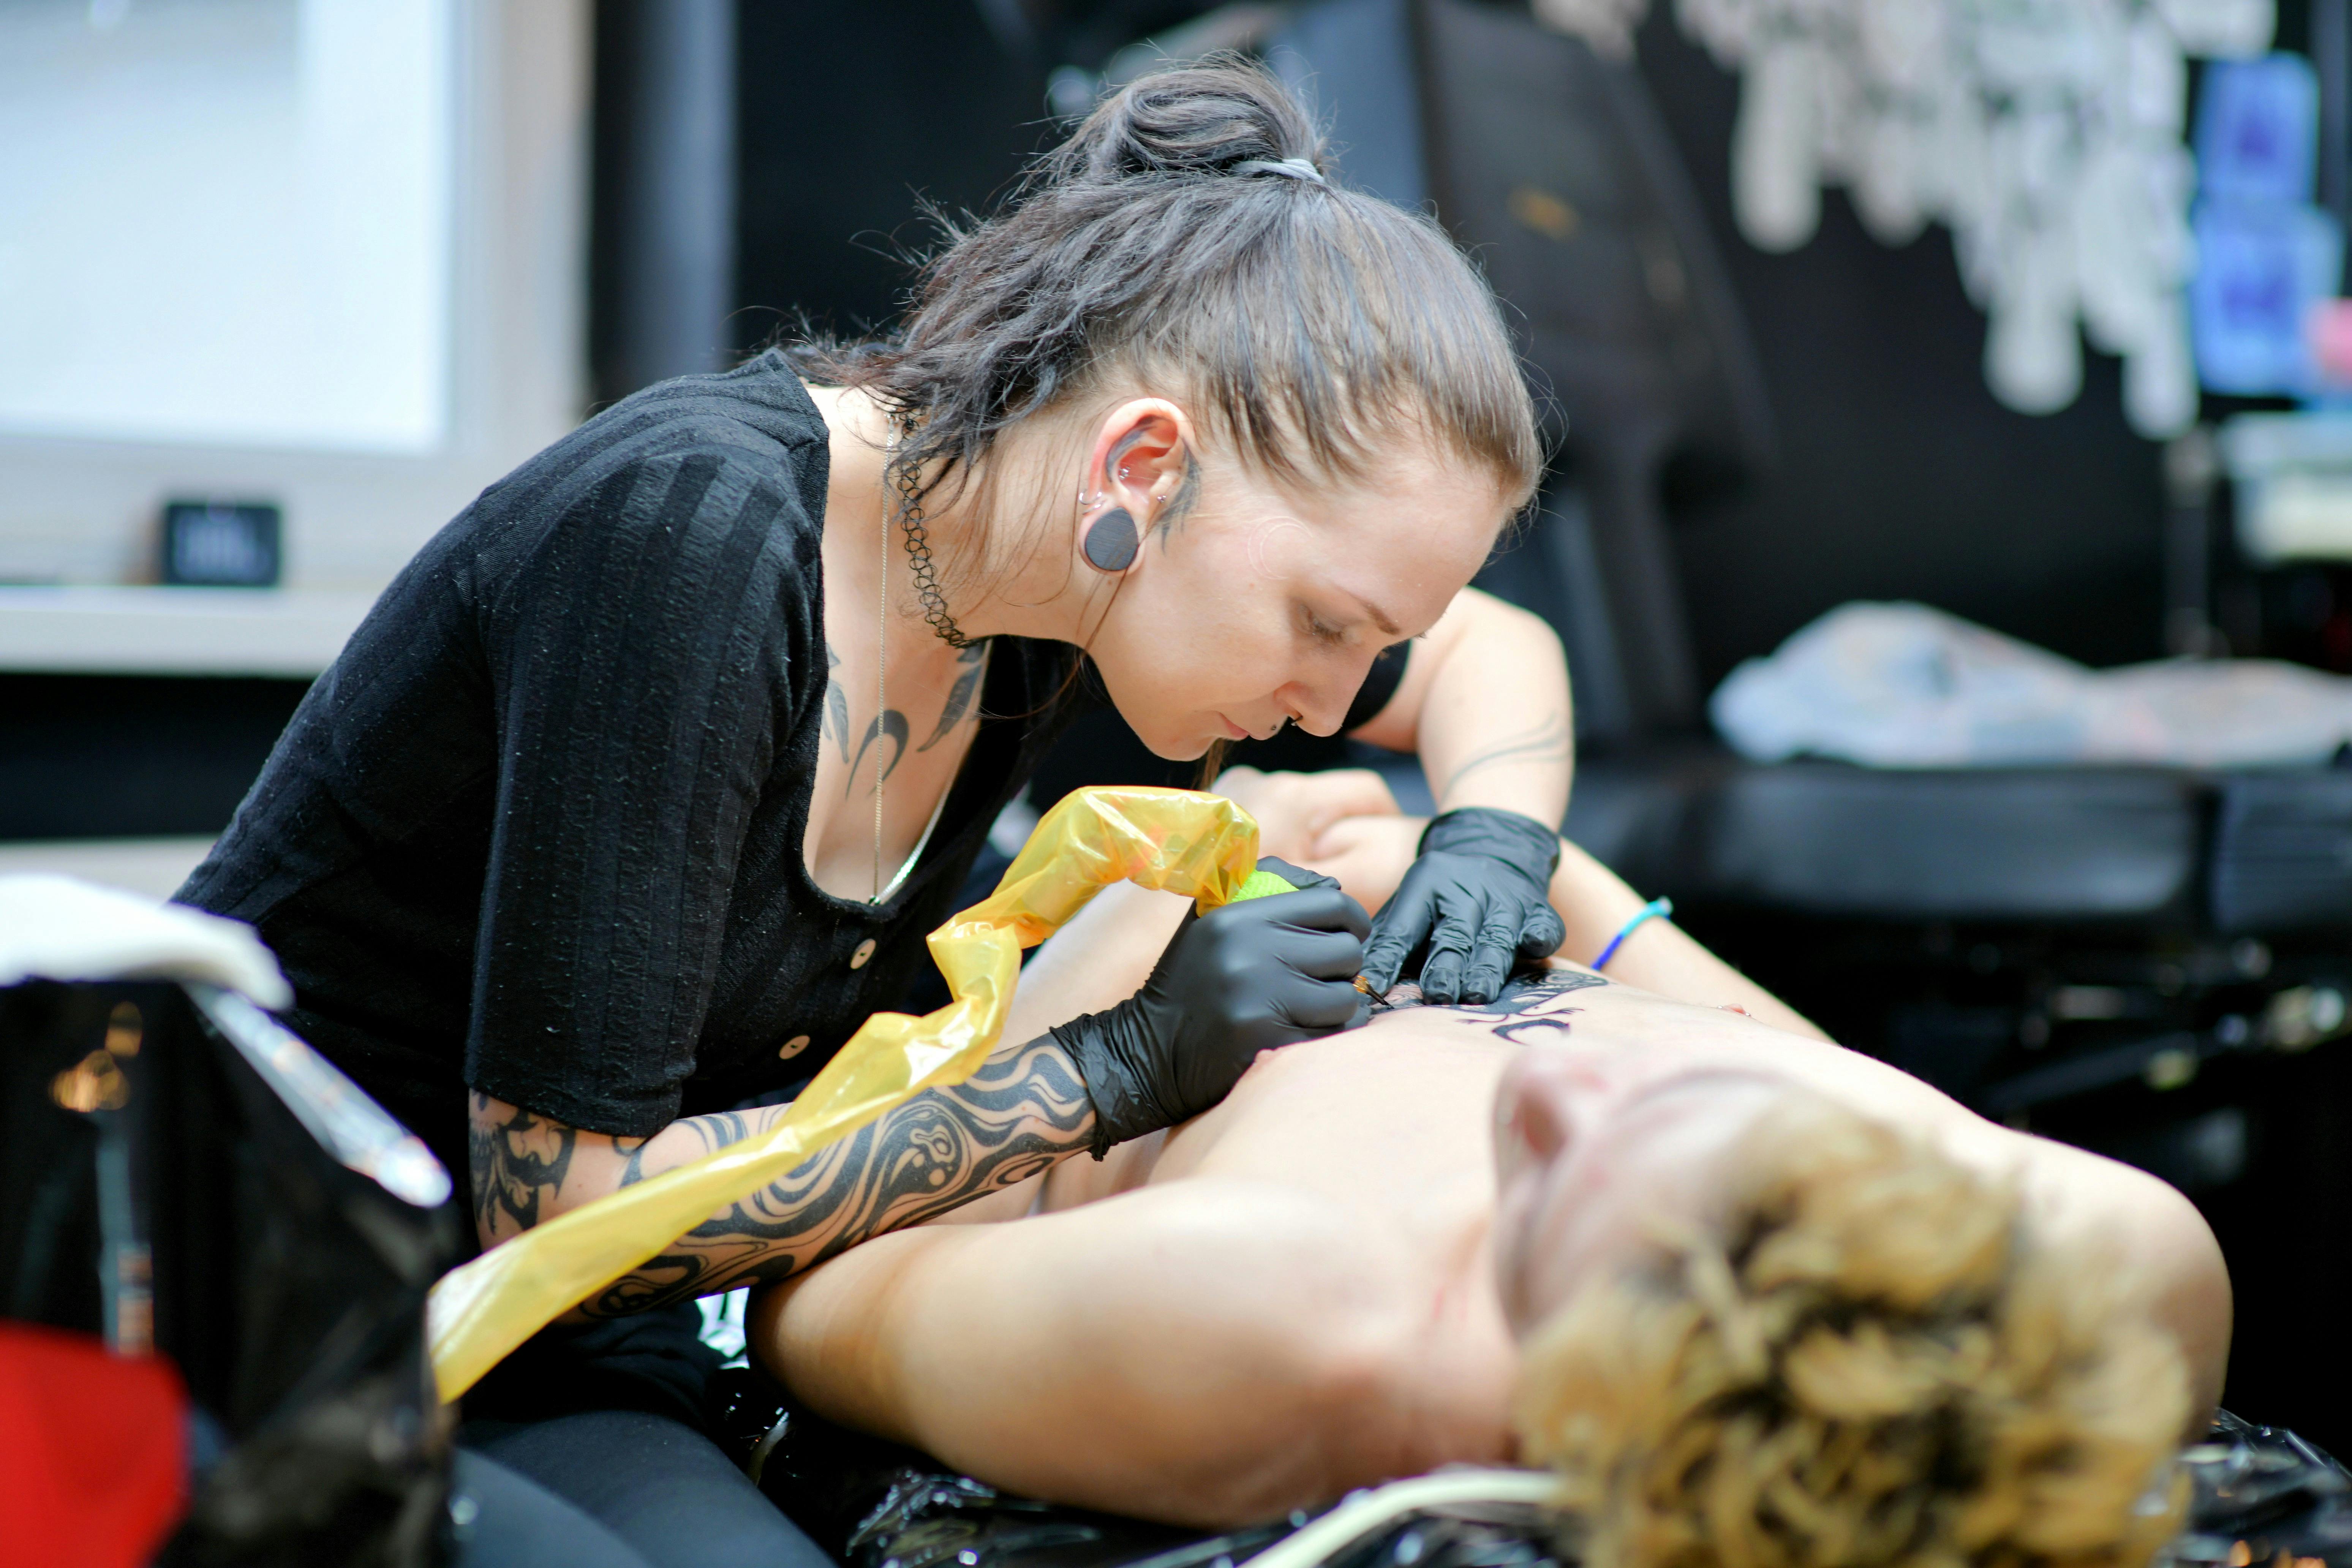 Free Photos - A Beautiful Young Woman Tattoo Artist Meticulously Examining  Her Latest Piece Of Work. She Is Holding A Magnifying Glass As She  Meticulously Inspects Her Creation, Showcasing Her Attention To